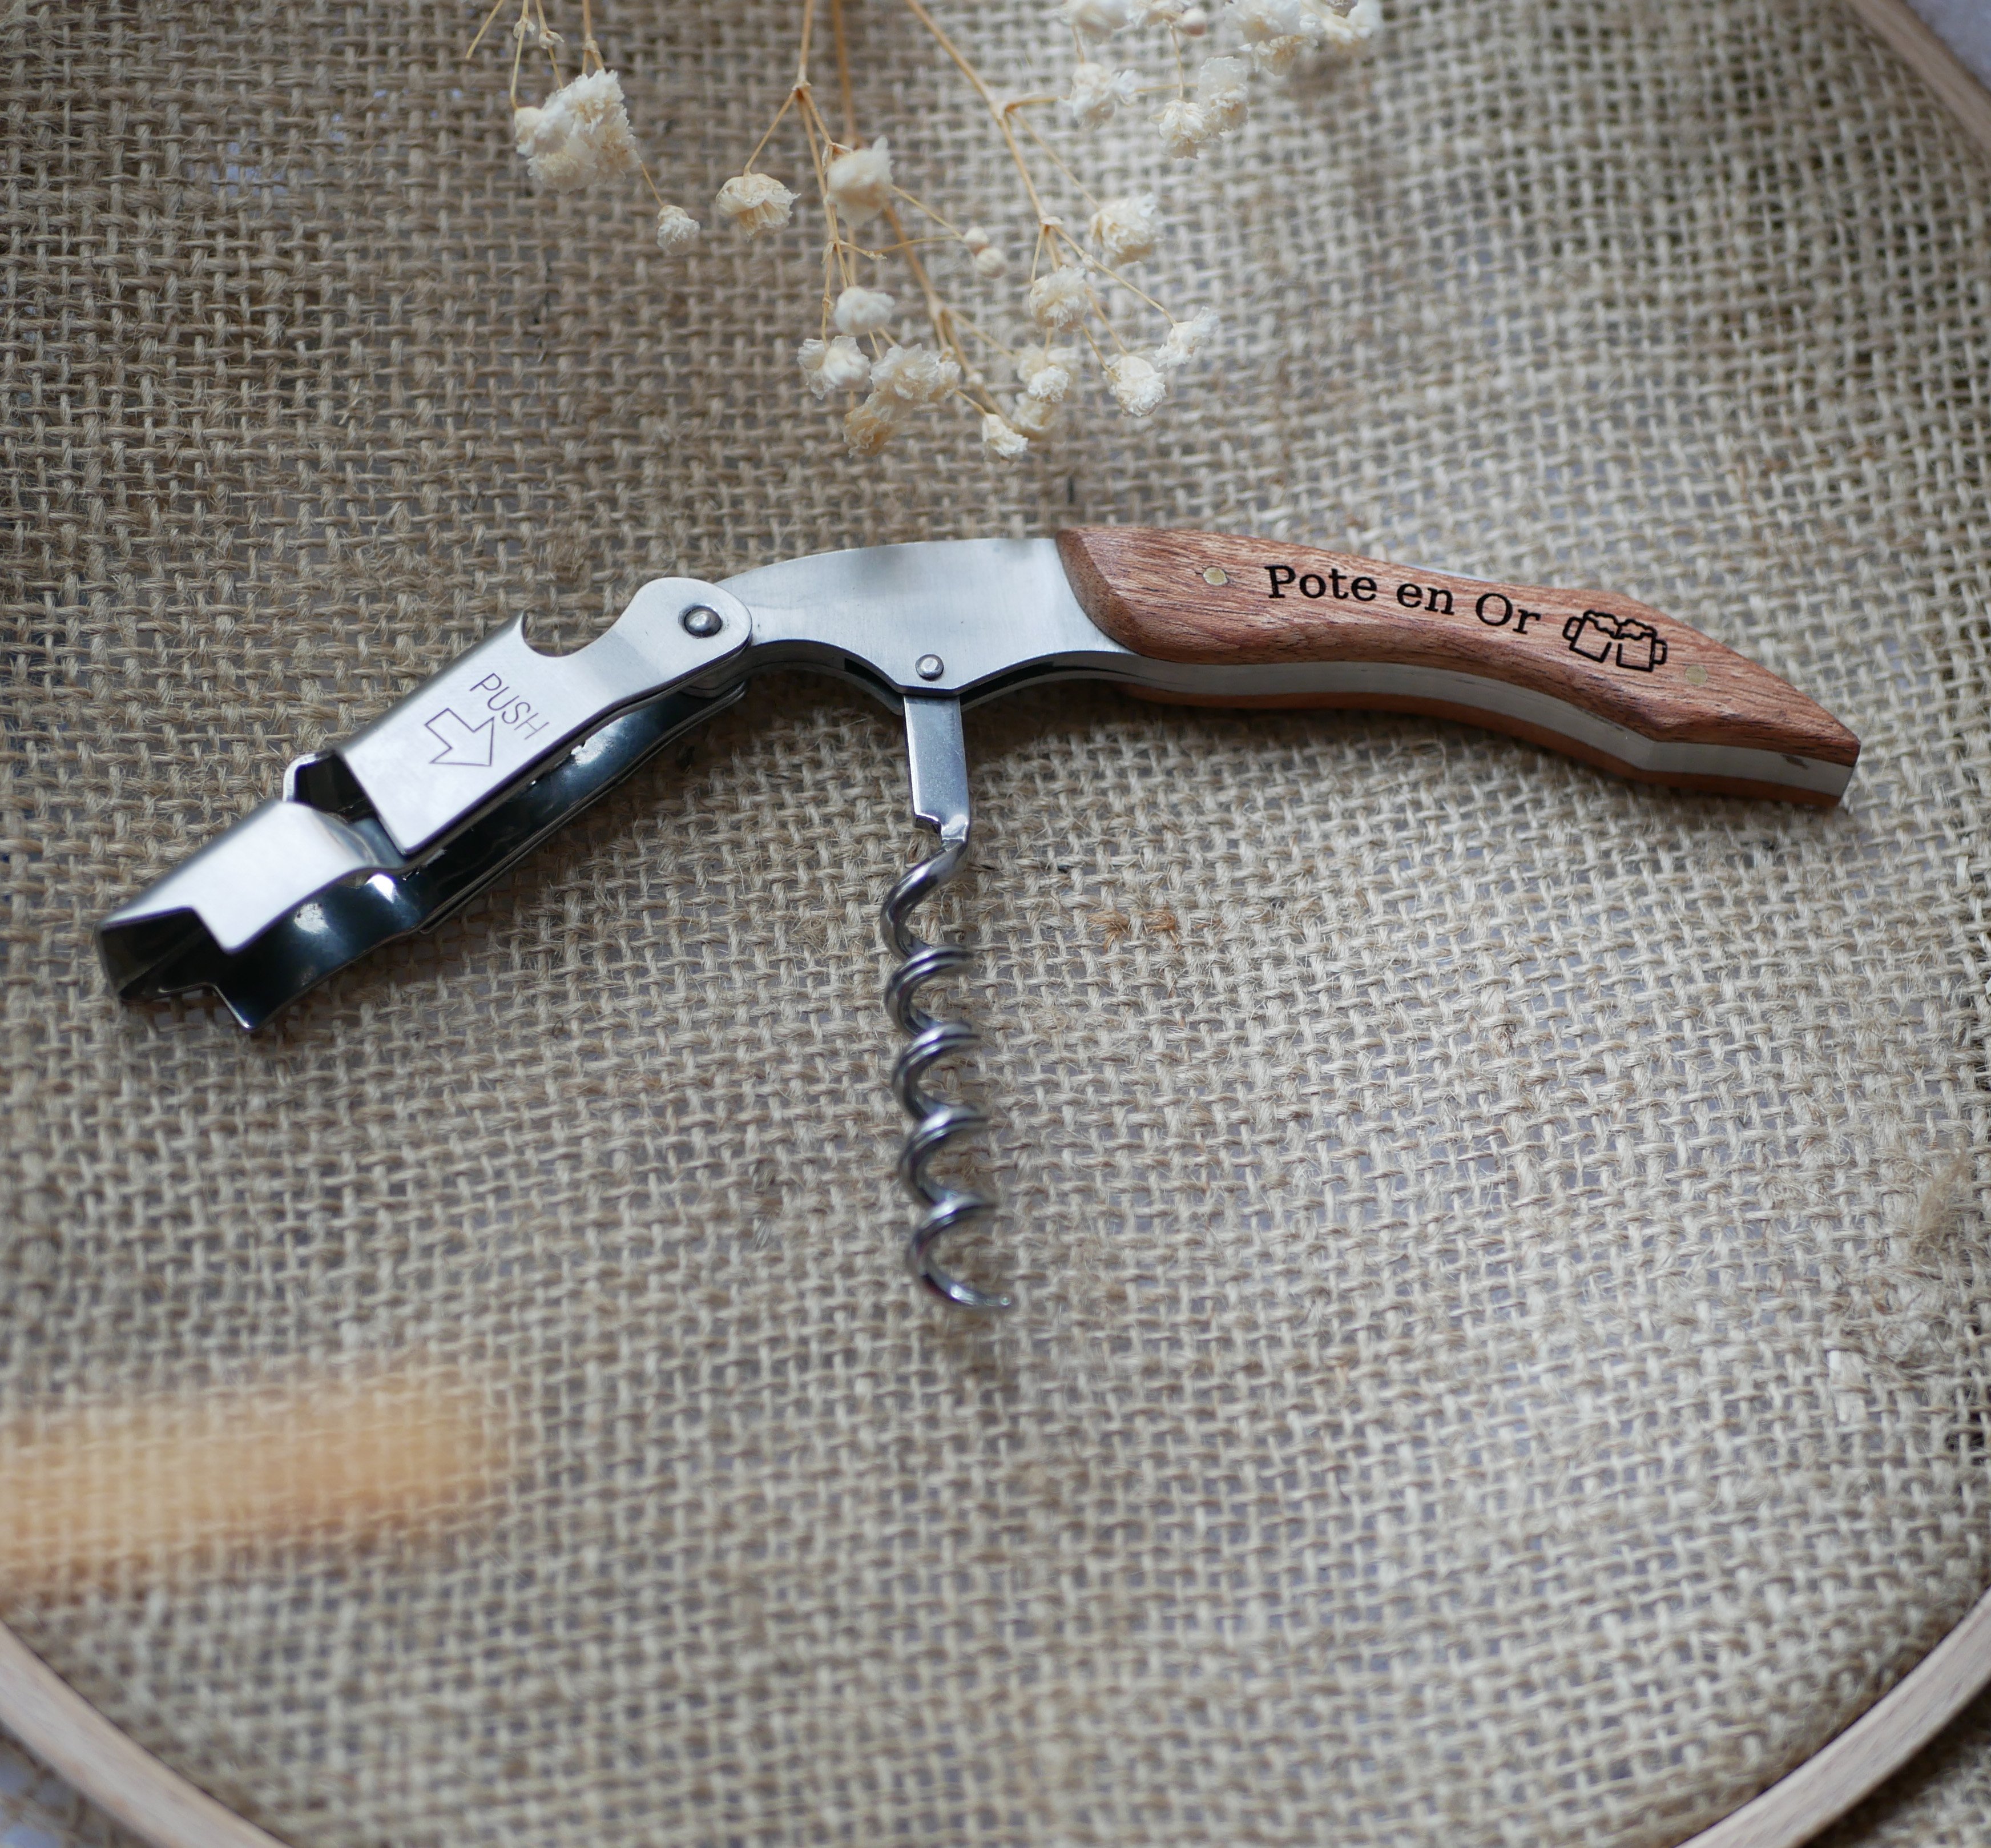 Corkscrew with engraved wooden handle to personalize